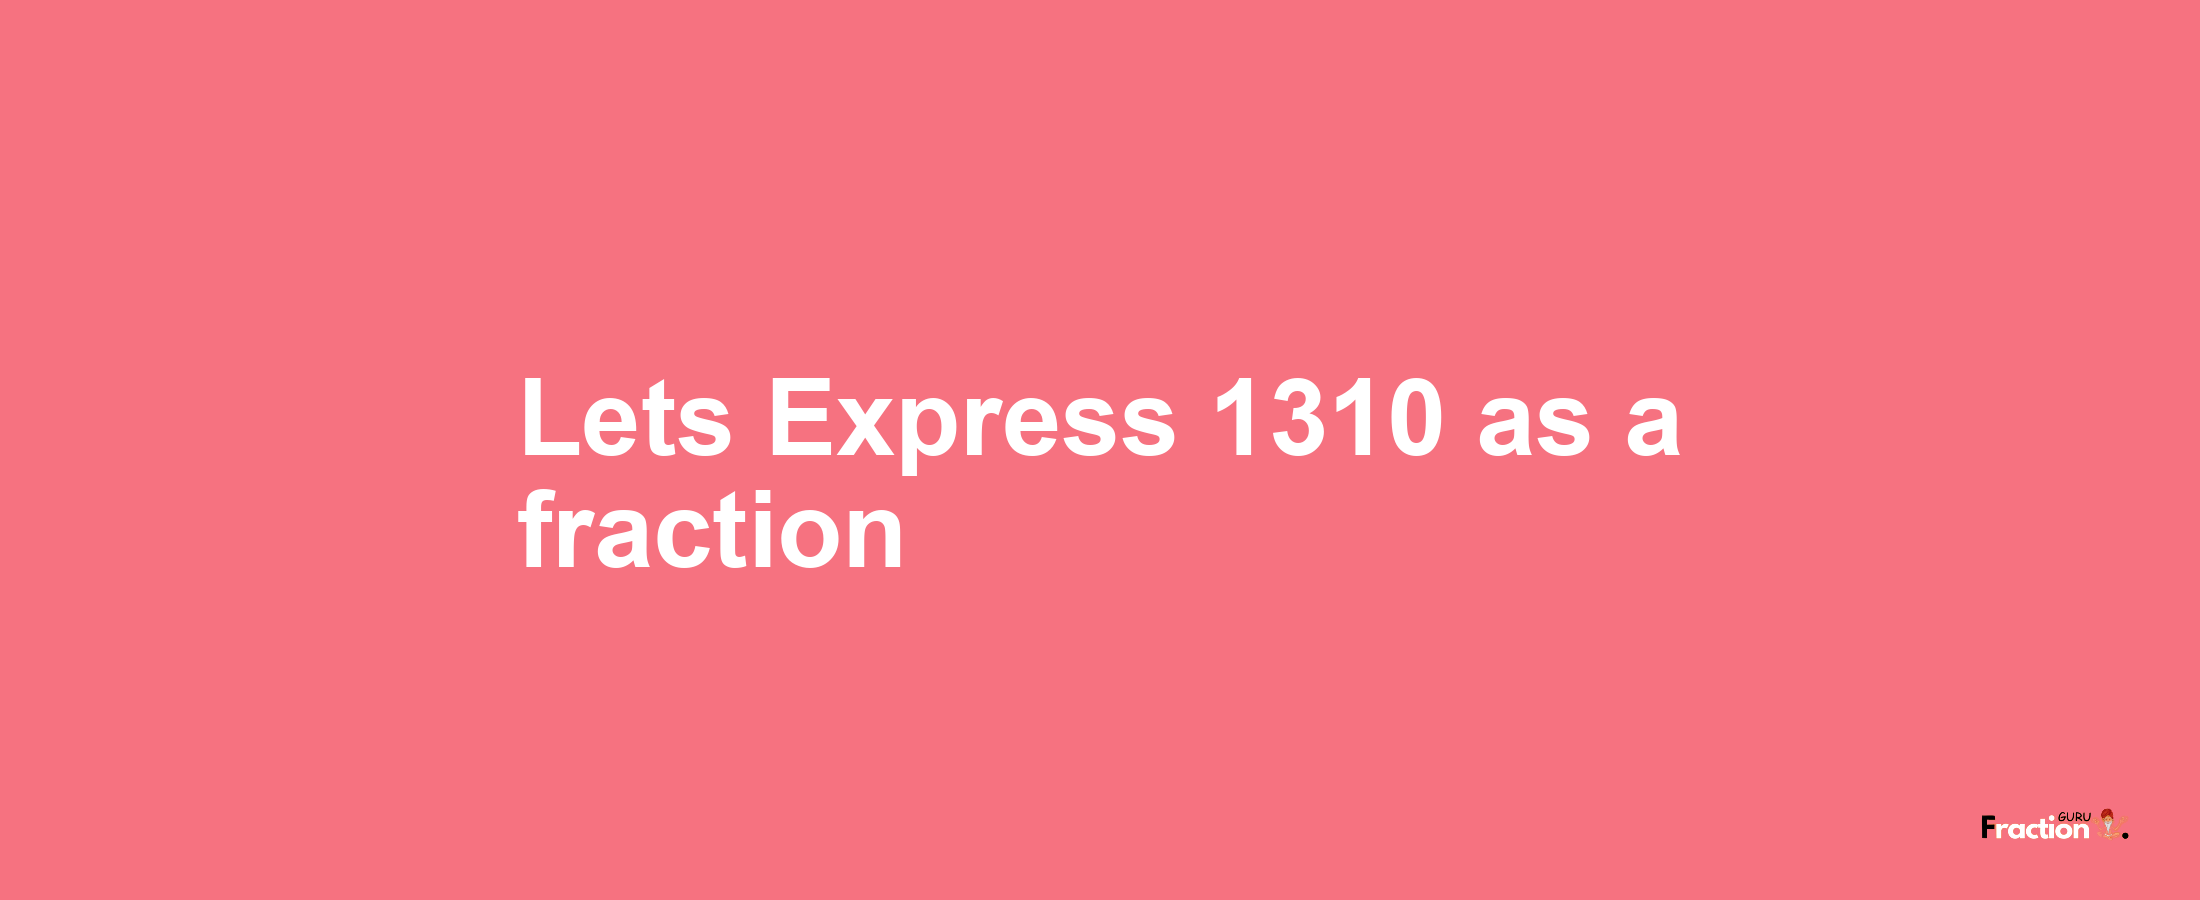 Lets Express 1310 as afraction